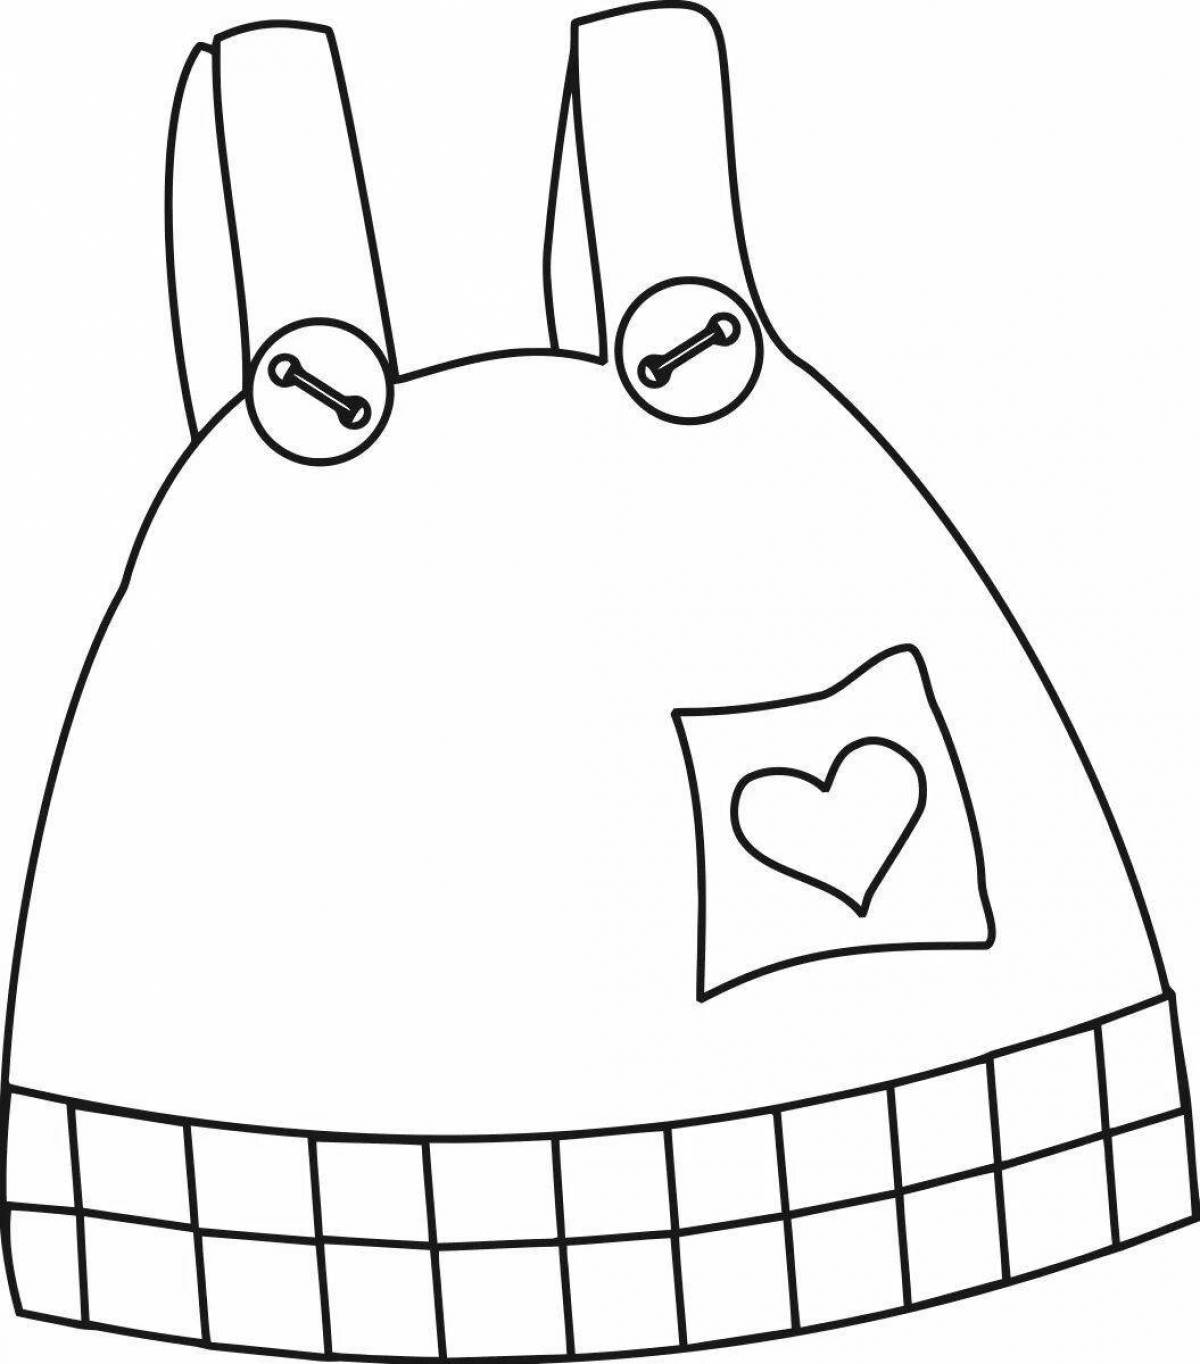 Lalafanfan duck coloring page with clothes